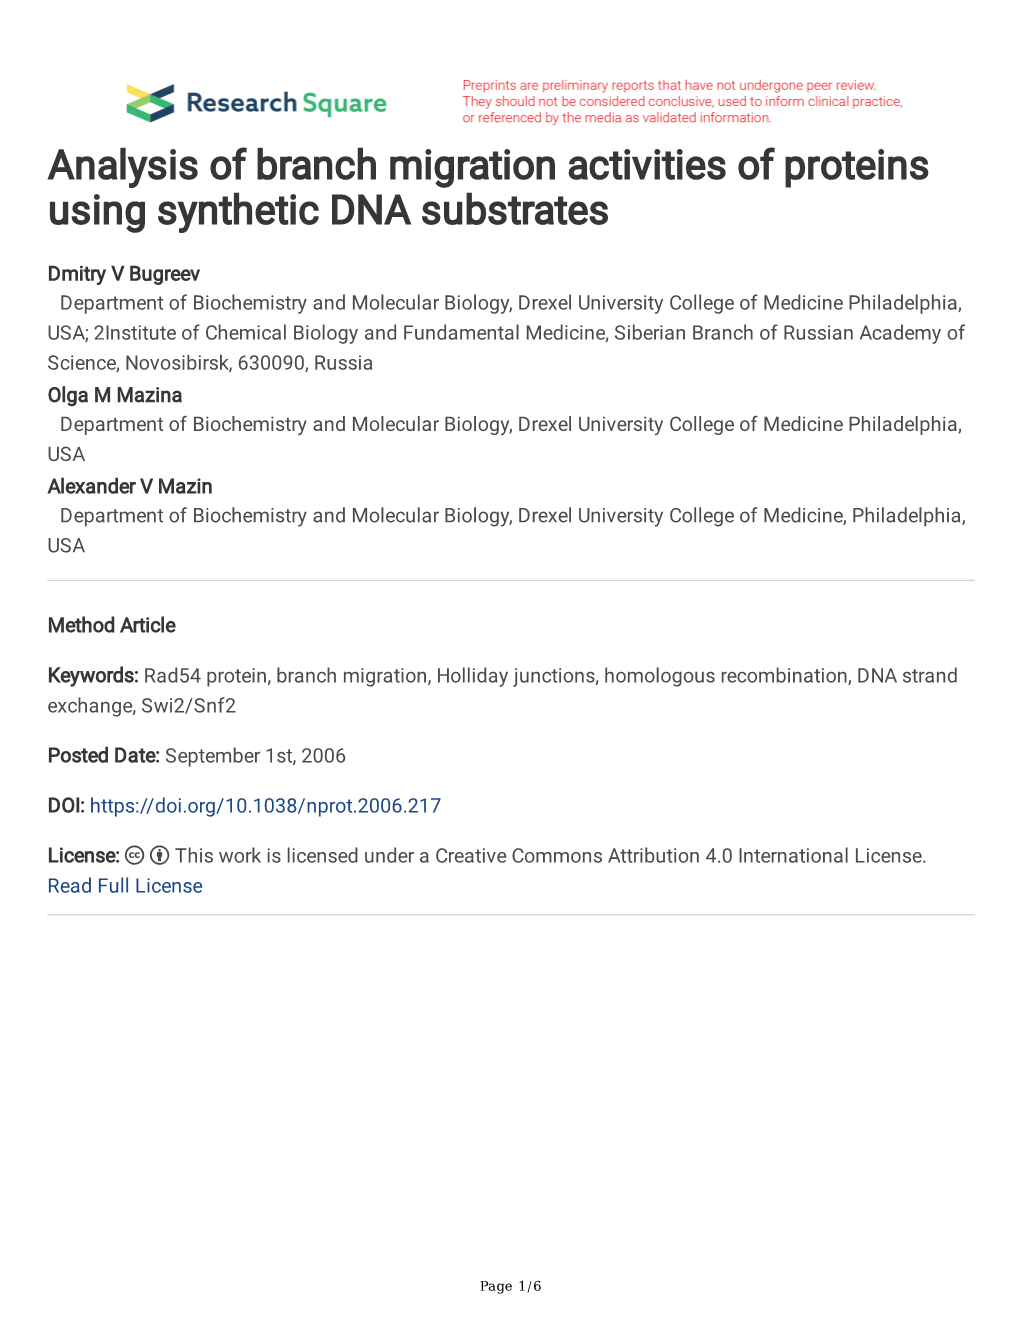 Analysis of Branch Migration Activities of Proteins Using Synthetic DNA Substrates